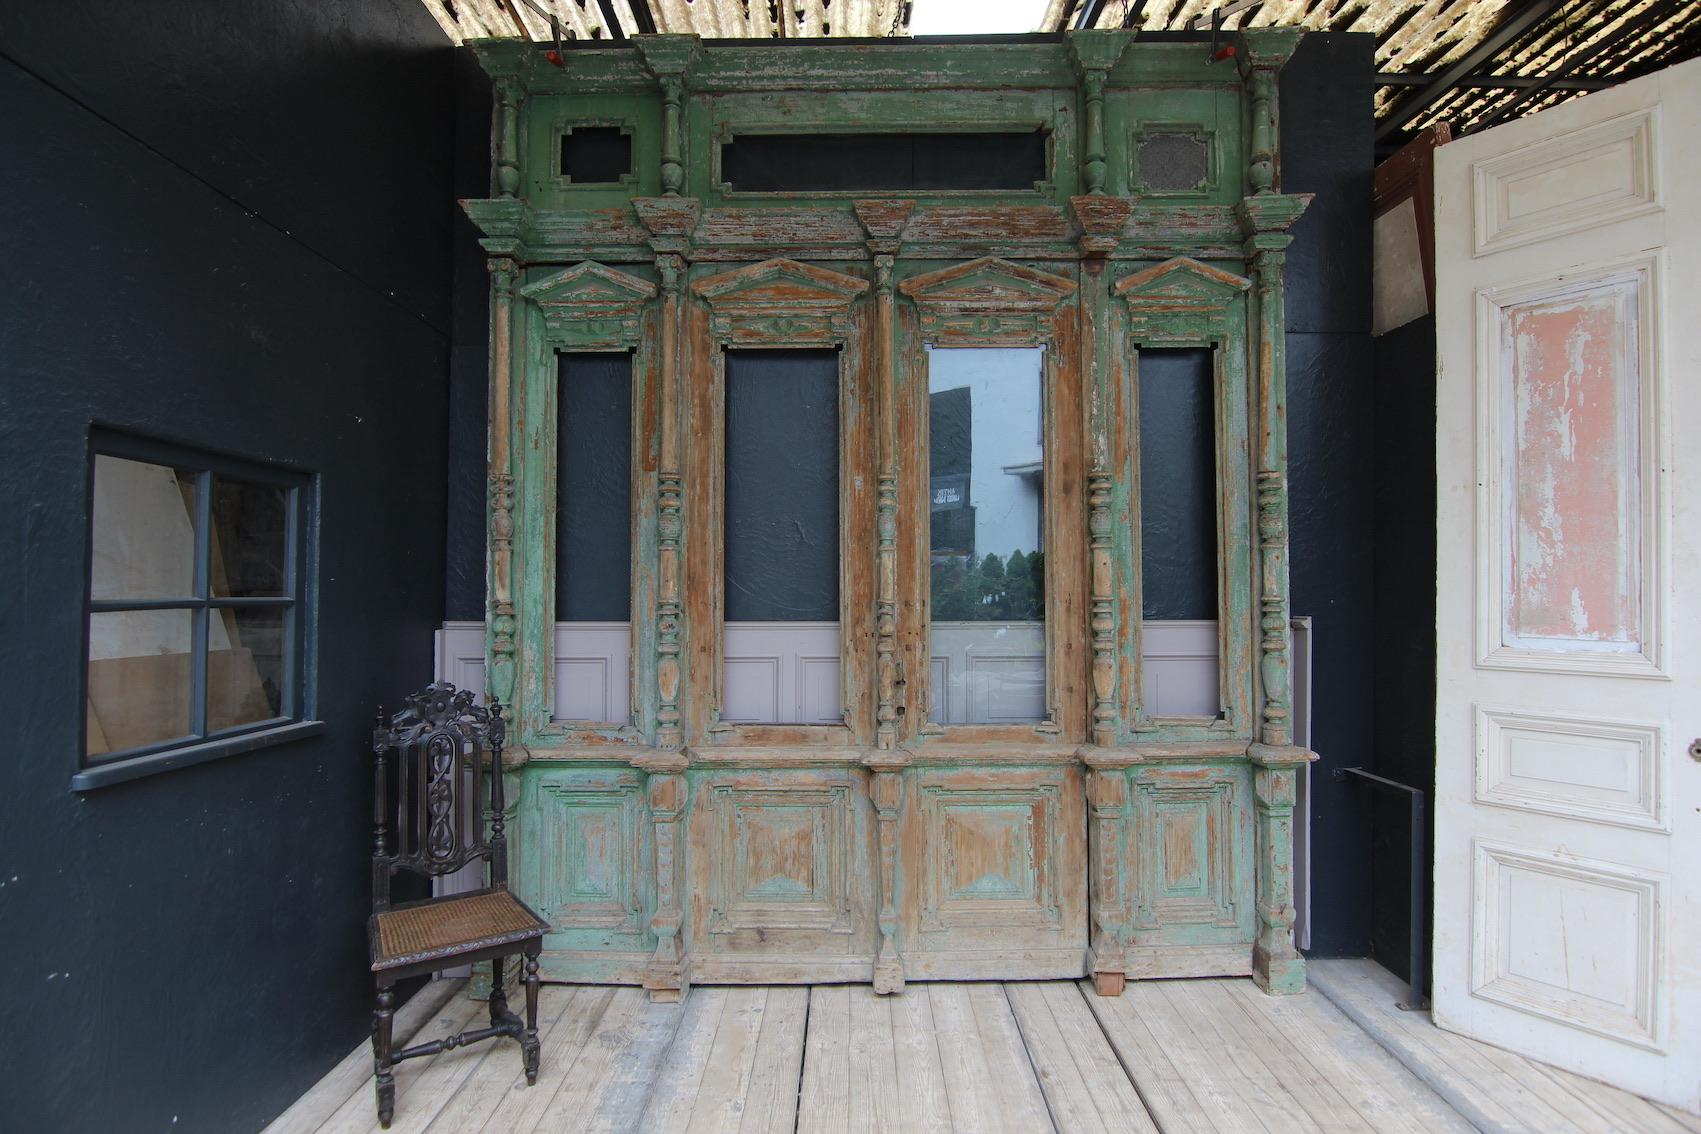 A complete house front door set from the late 19th century, consisting of a double door, two fixed elements on the right and left and the continuous skylight (window). Made from solid pine with a wonderful original patina. Also ideal as a decorative